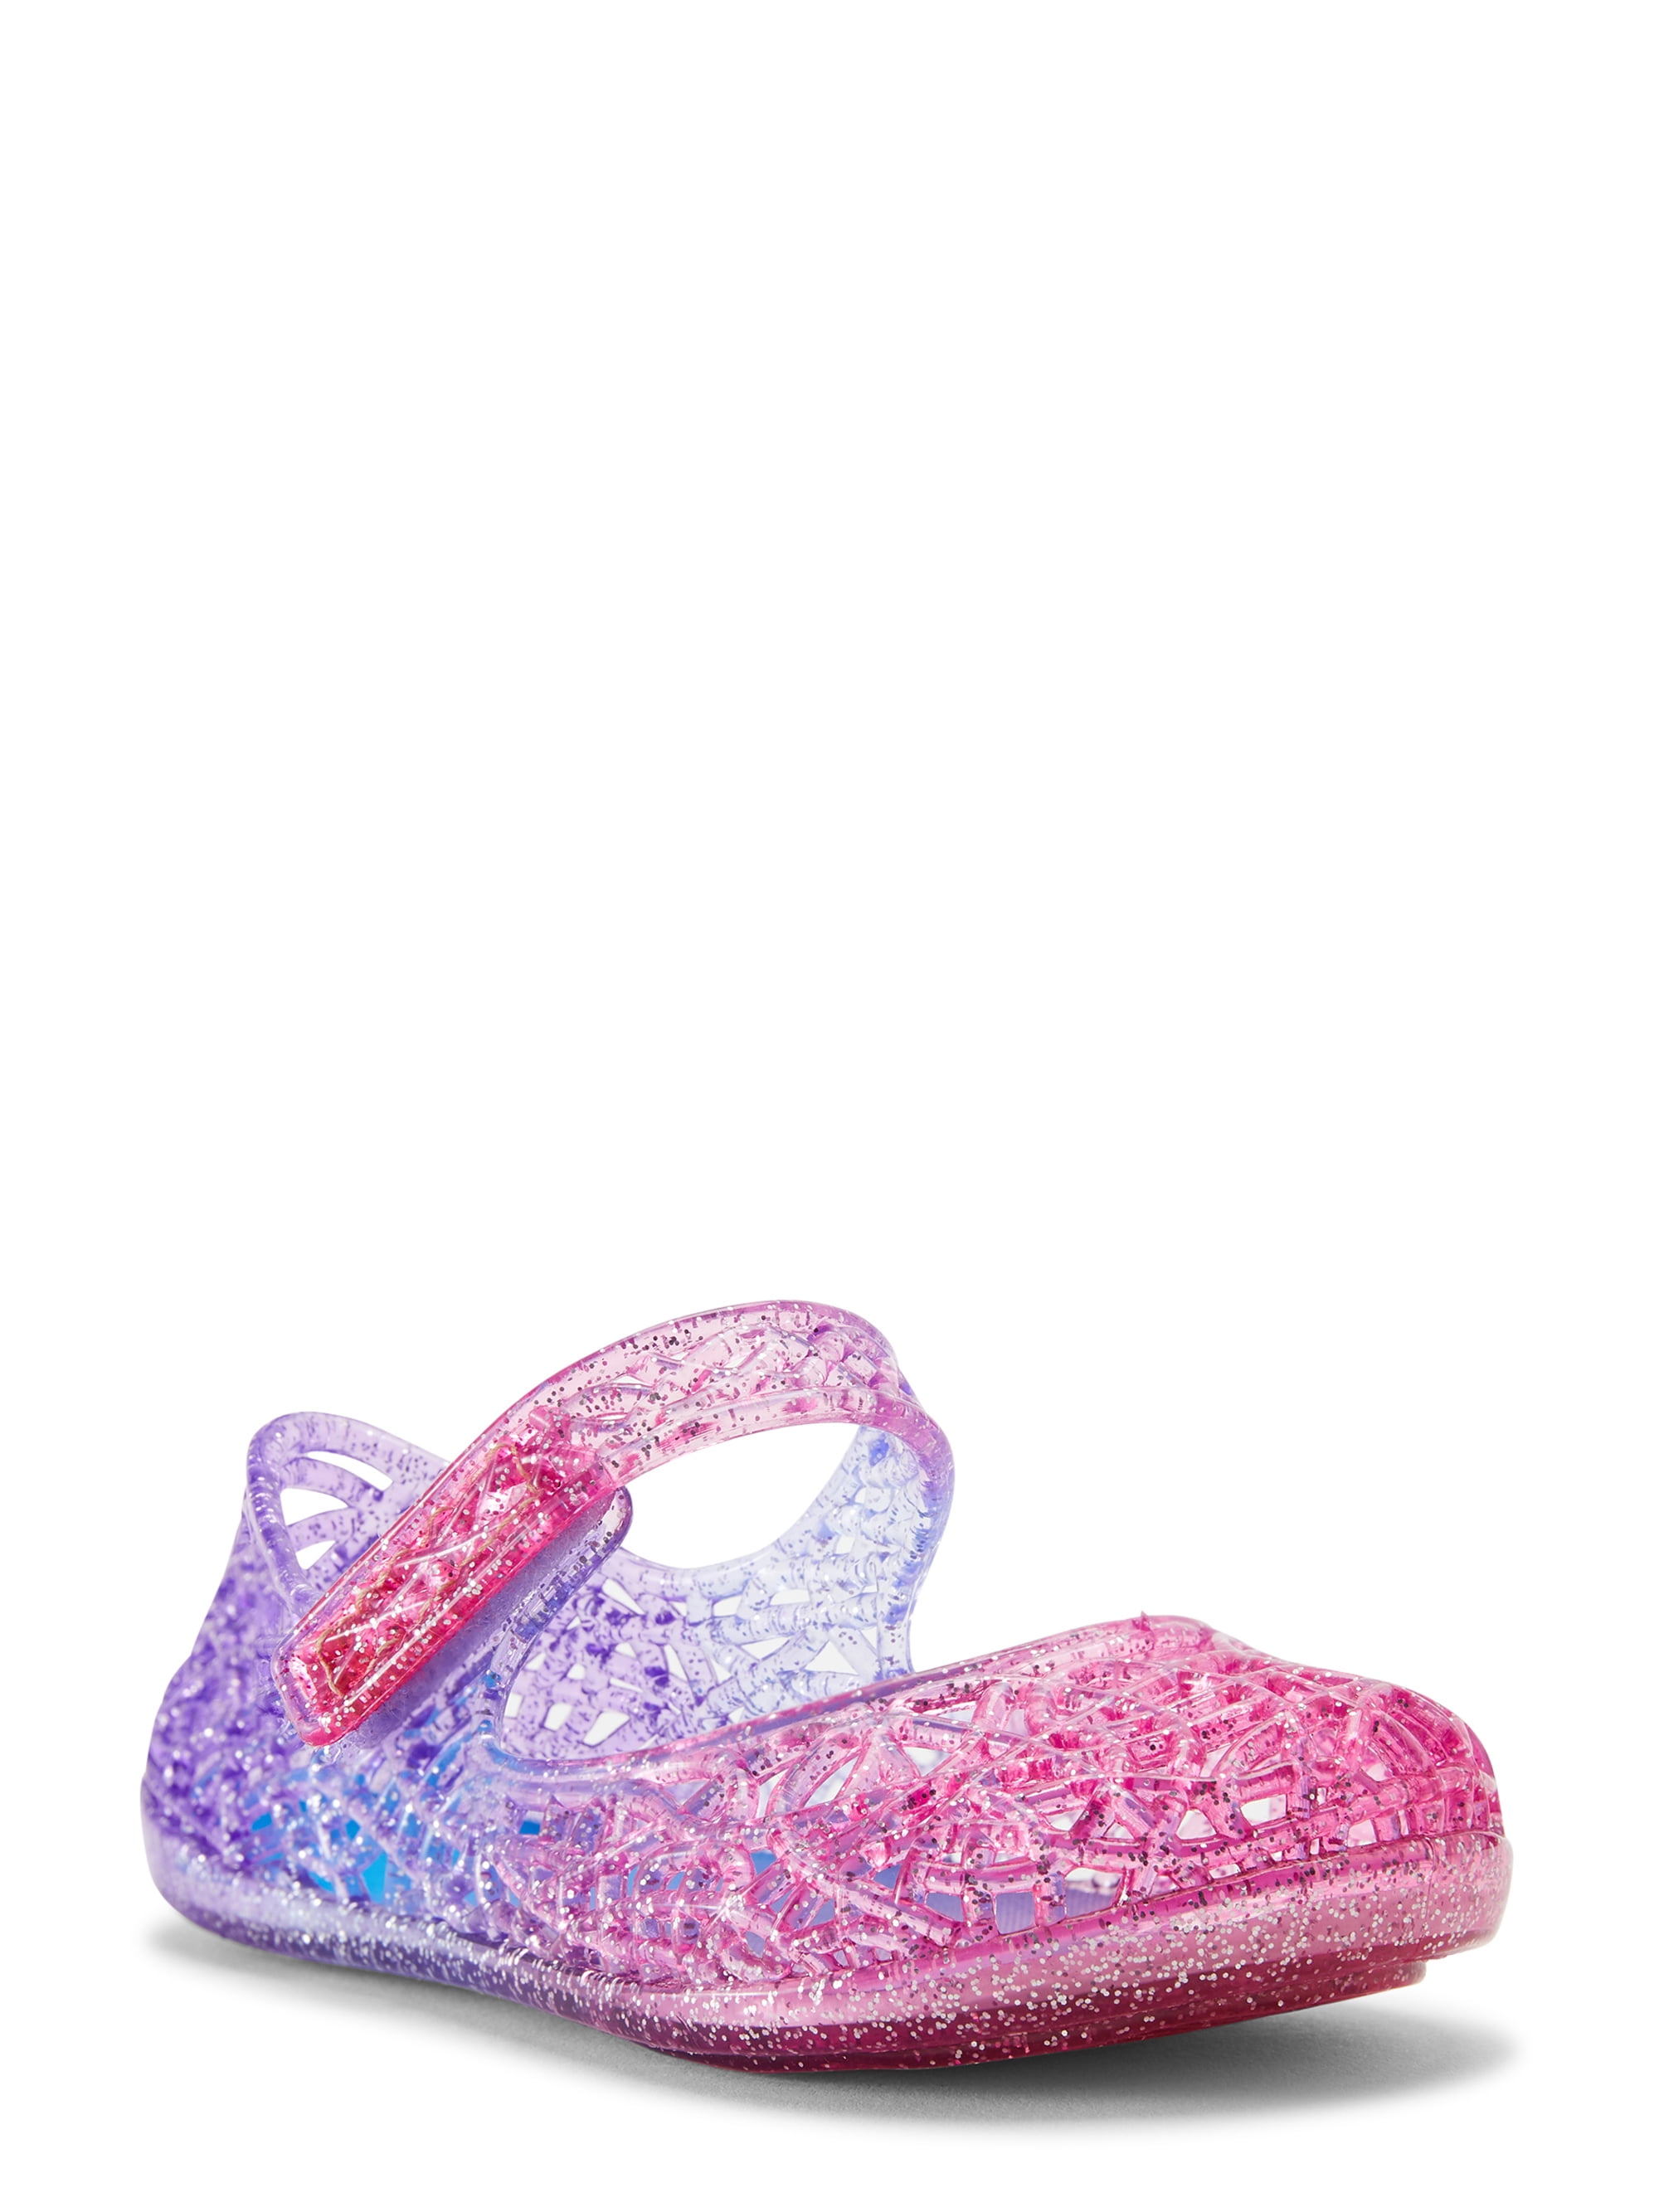 Wonder Nation Girls Mary Jane Jelly Sandal Shoes Size 6 Clear Sparkle NEW 